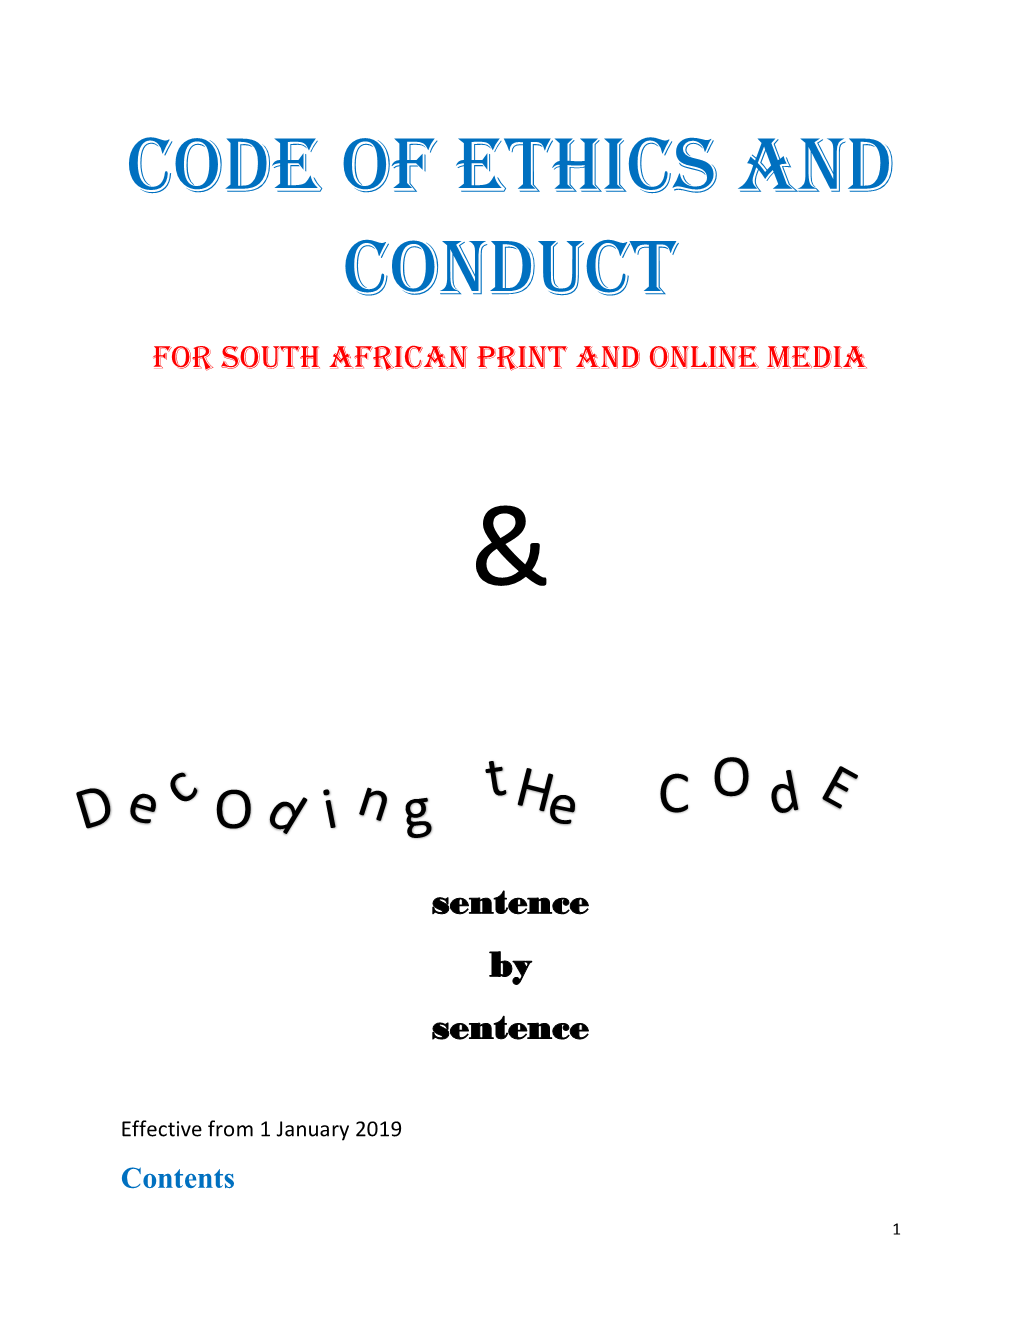 Code of Ethics and Conduct Is the First and Most Important Way of Regulating the Press and Online Media (“The Media”, for the Purpose of This Exercise)